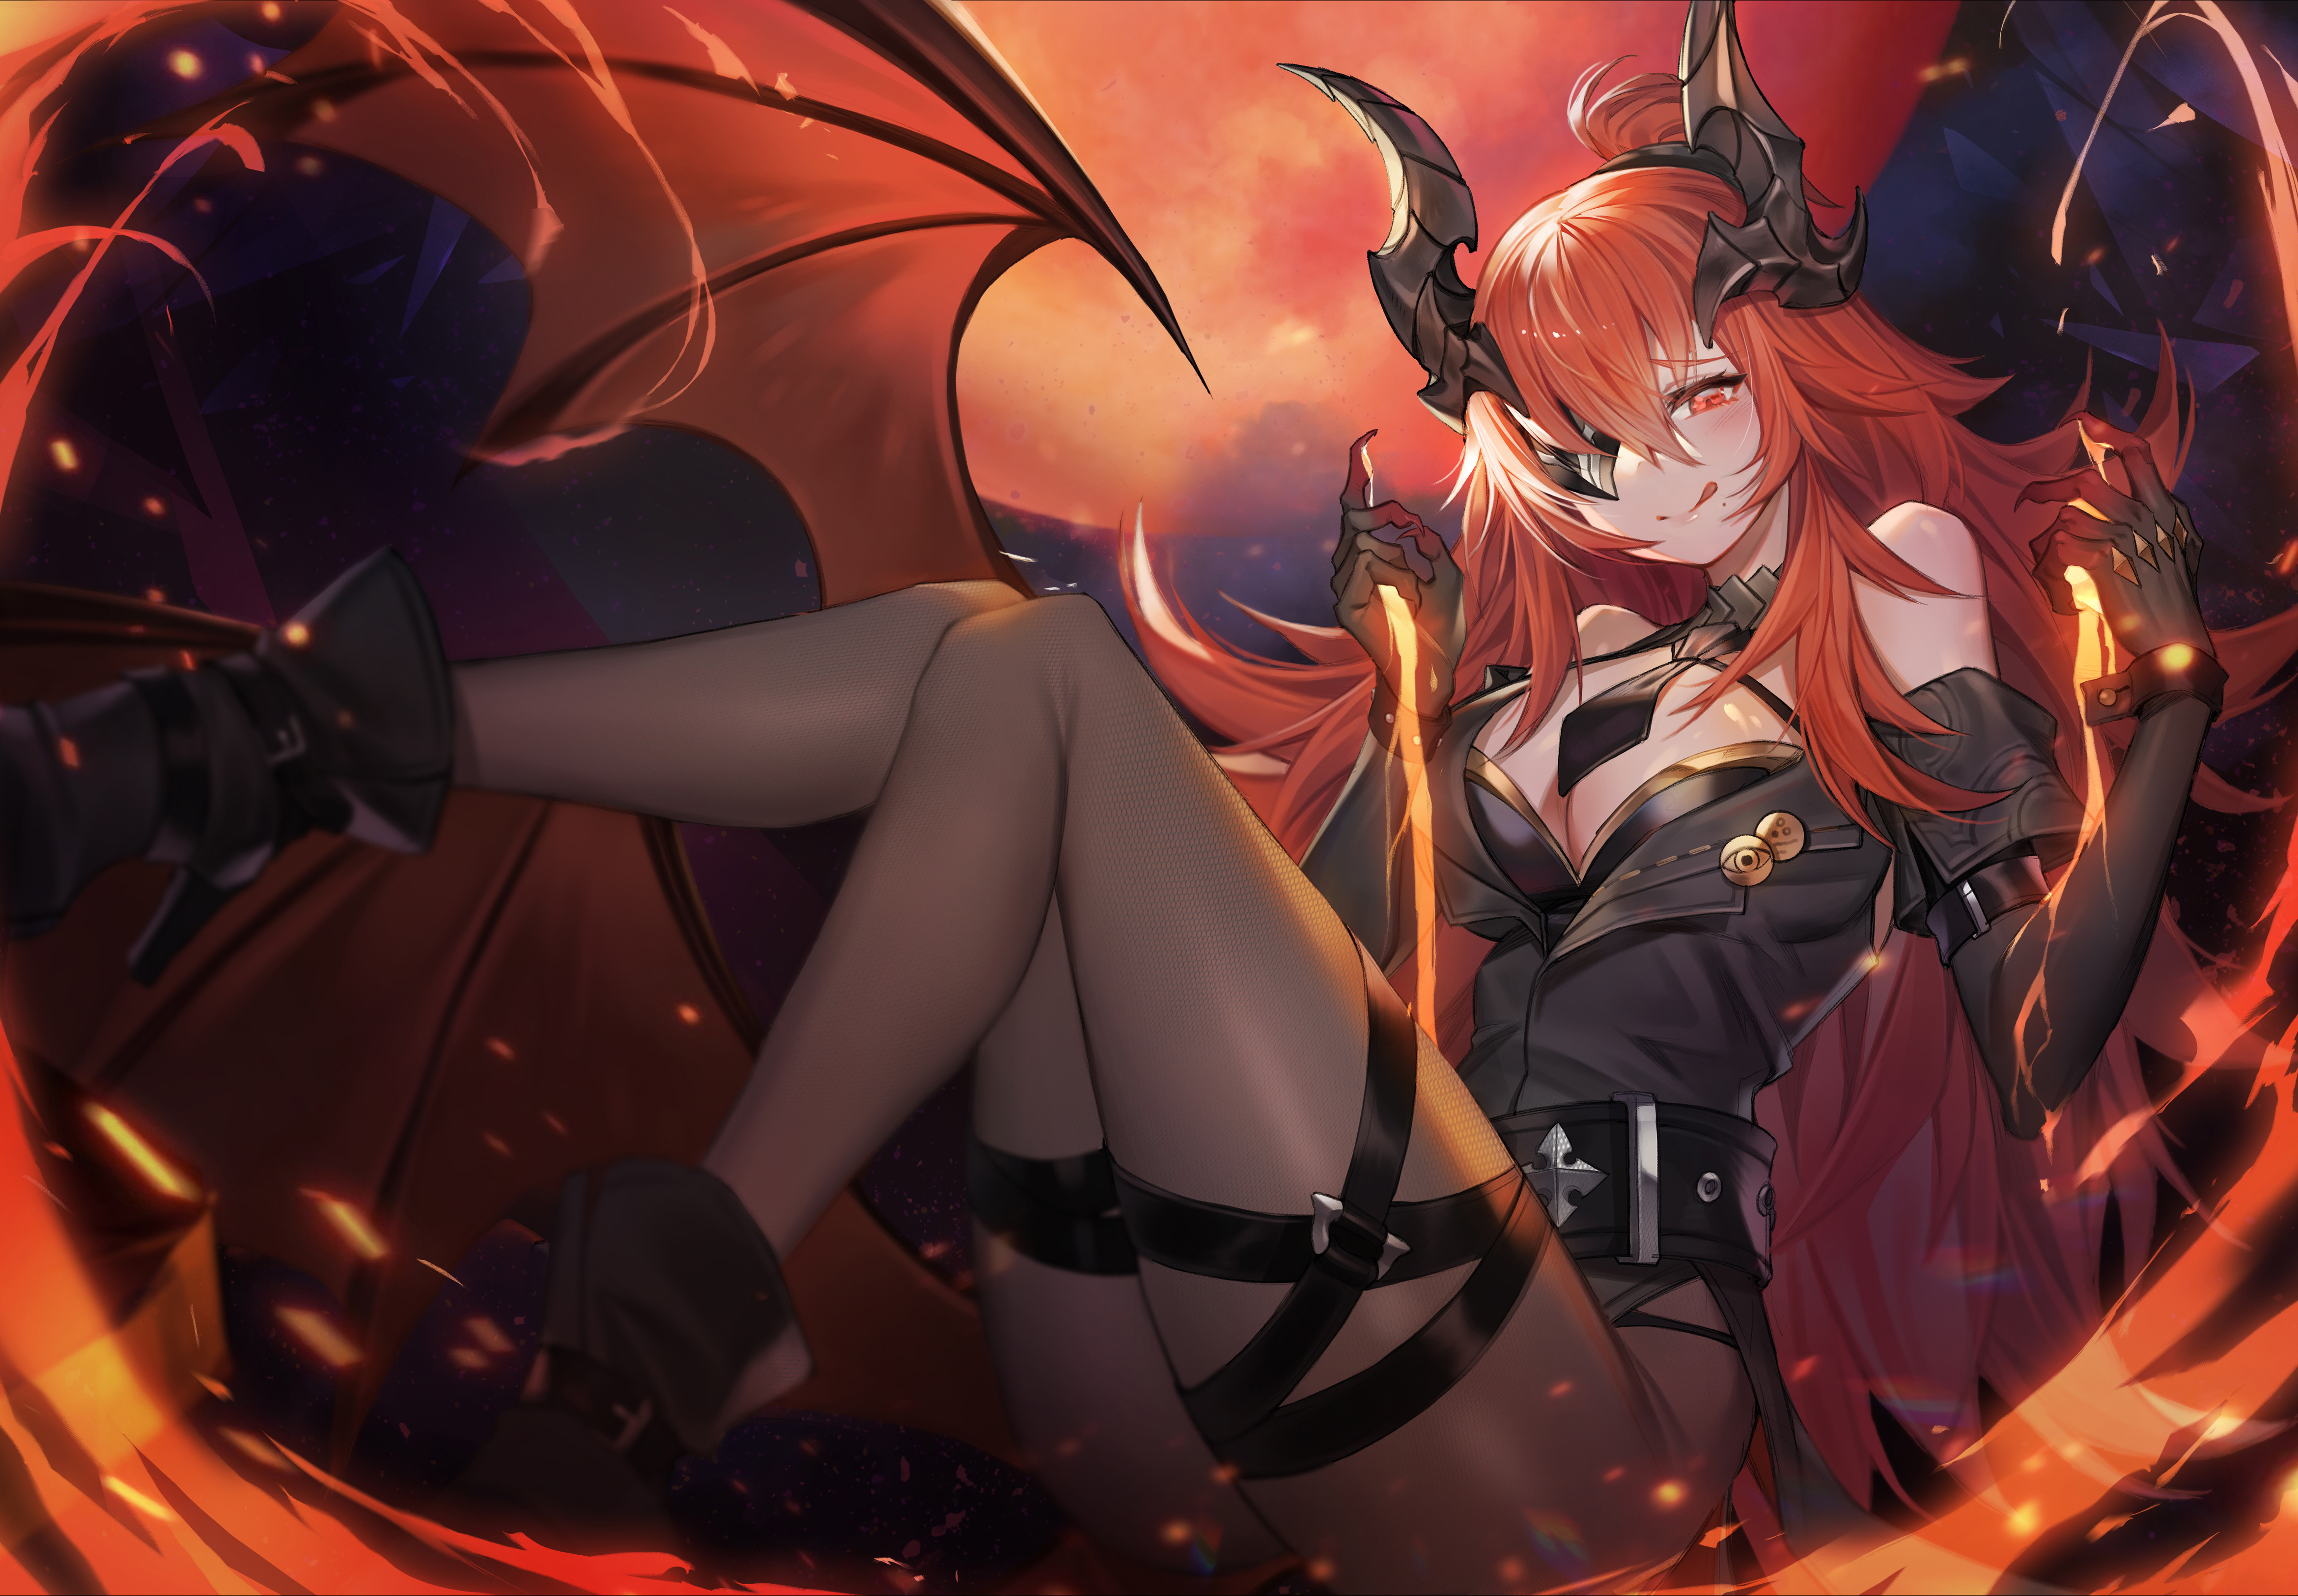 Anime 4678x3249 amnag anime anime girls dragon girl Alchemy Stars horns wings eyepatches red eyes redhead long hair licking lips pantyhose cleavage